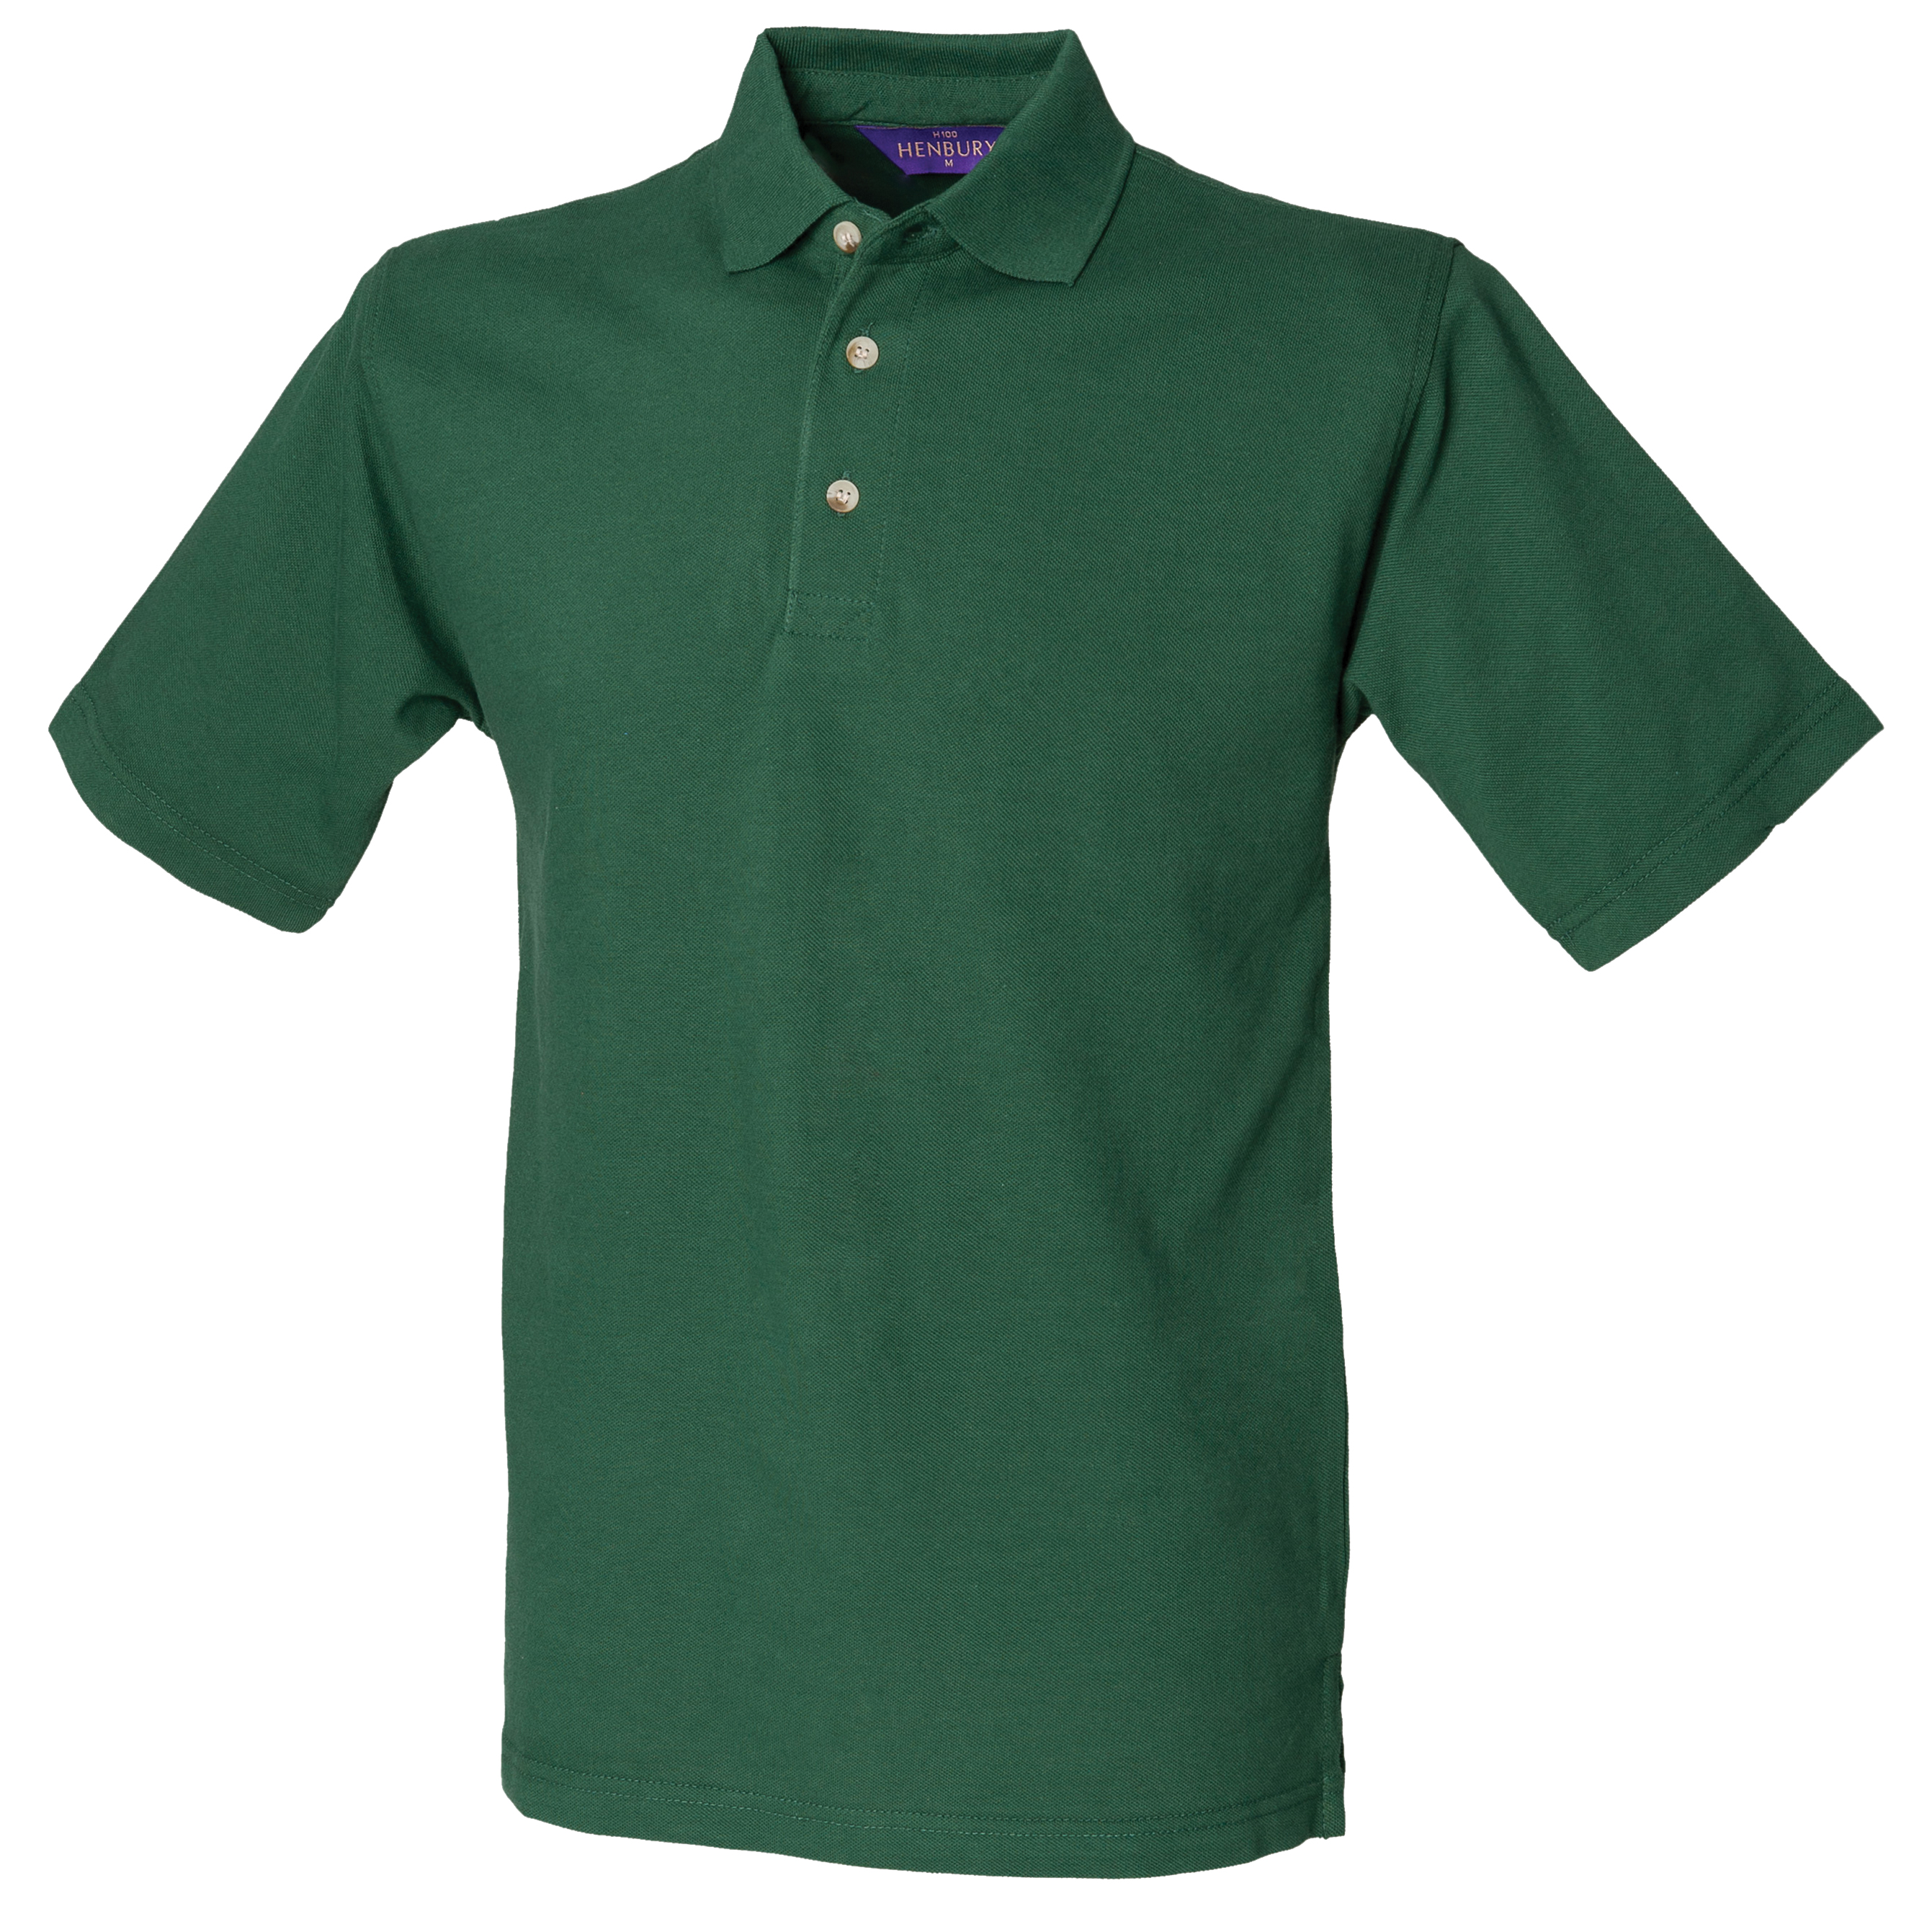 ax-httpswebsystems.s3.amazonaws.comtmp_for_downloadhenbury-classic-cotton-pique-polo-stand-up-bottle.jpg